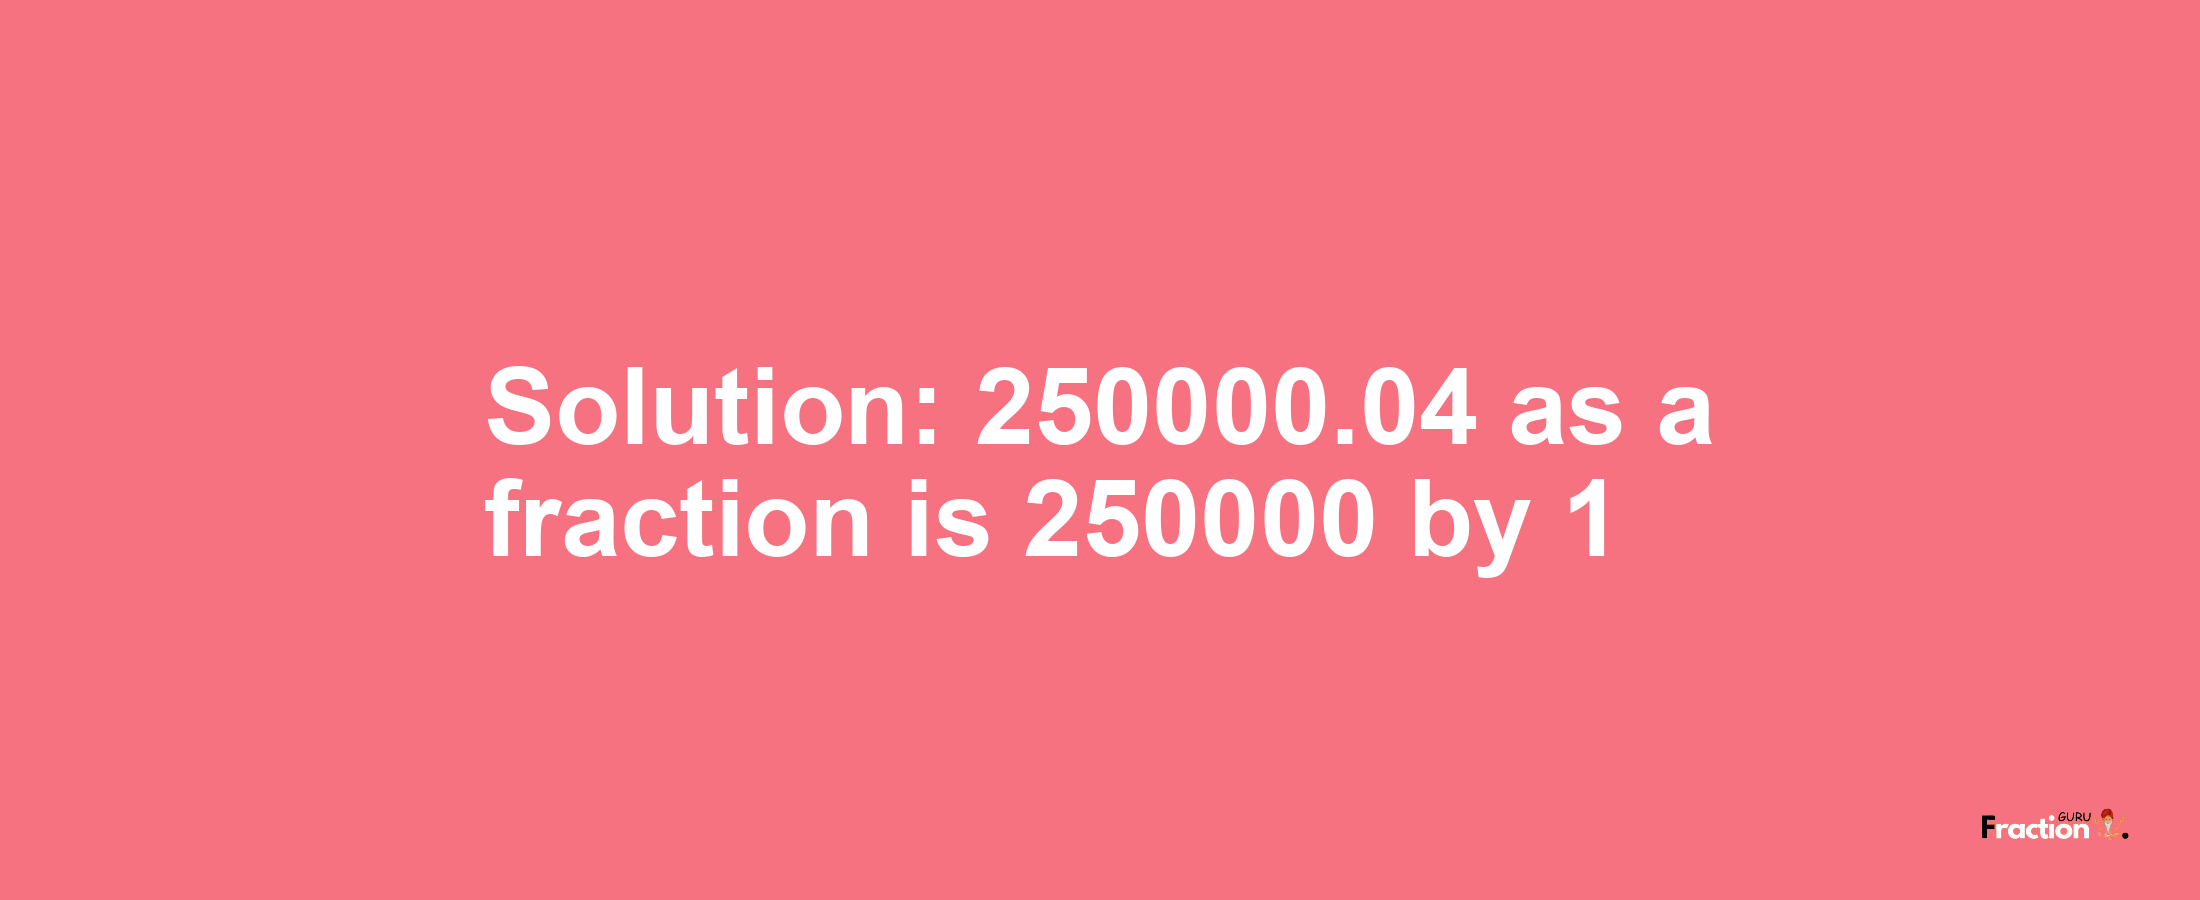 Solution:250000.04 as a fraction is 250000/1